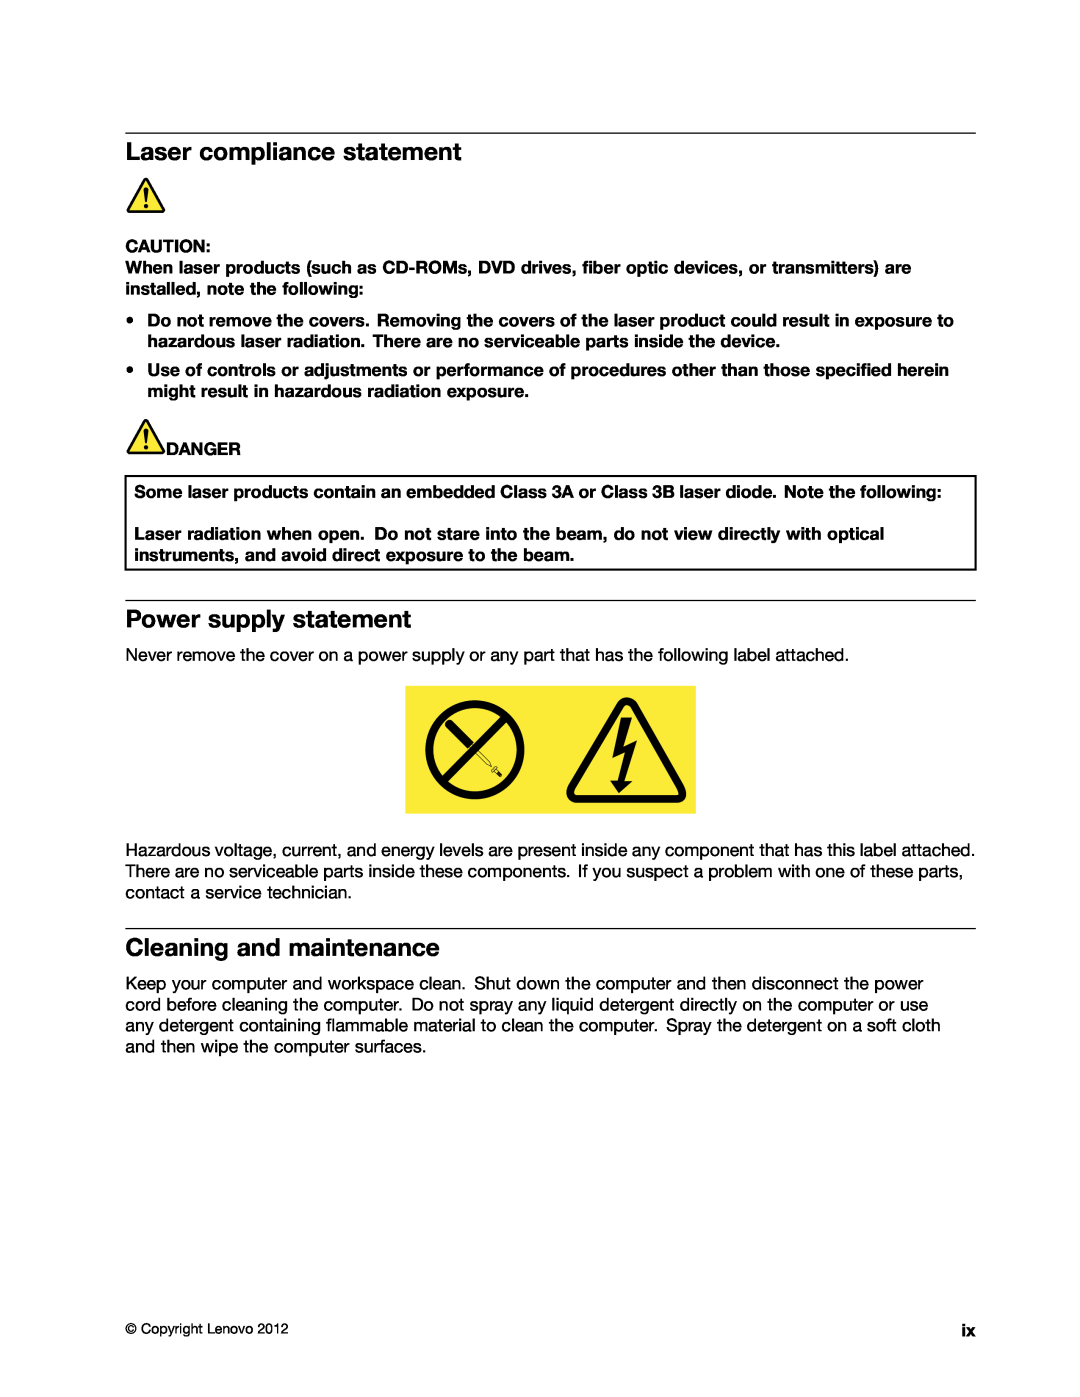 Lenovo 3484JMU manual Laser compliance statement, Power supply statement, Cleaning and maintenance, Danger 